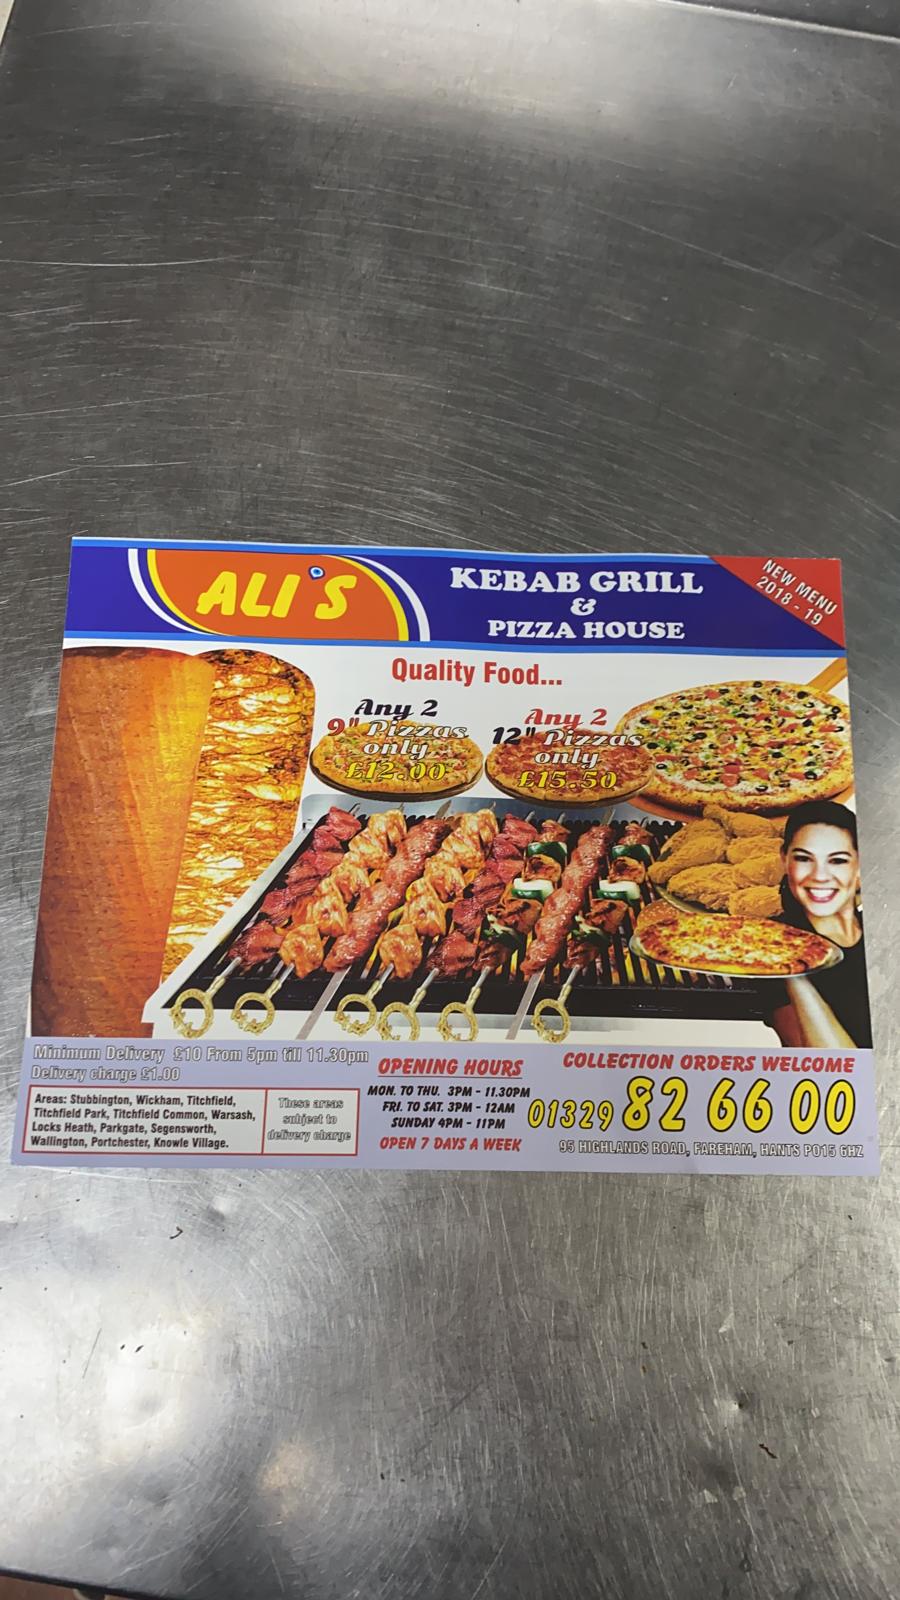 Ali's Kebab Grill and Pizza House